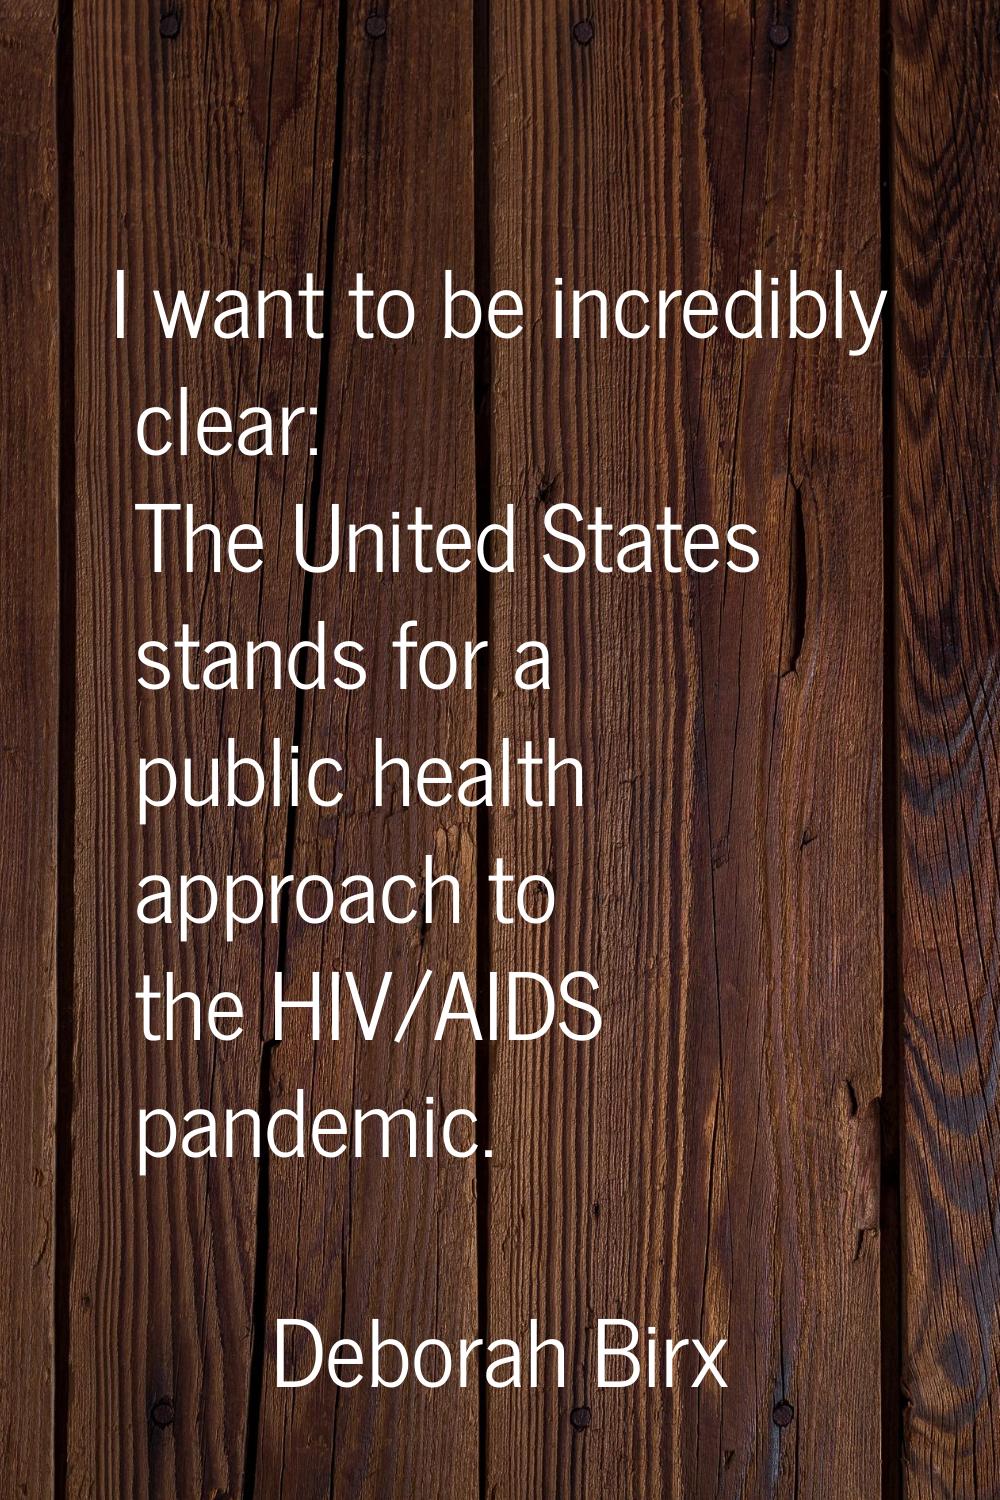 I want to be incredibly clear: The United States stands for a public health approach to the HIV/AID